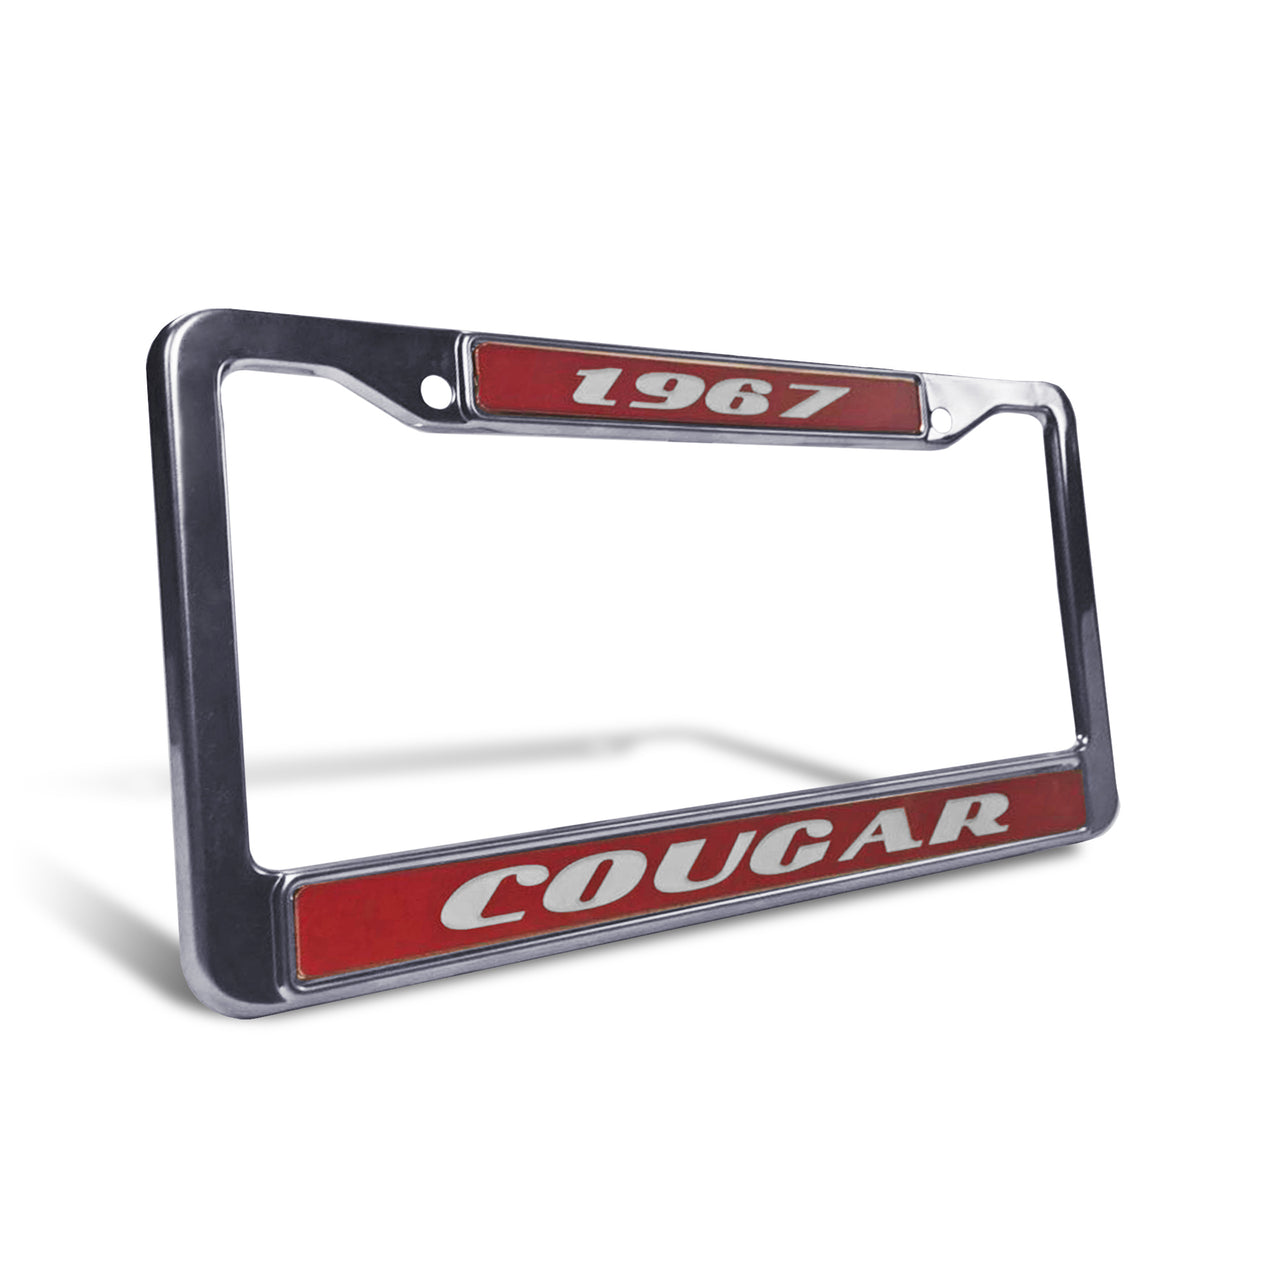 Personalized License Plate Frame